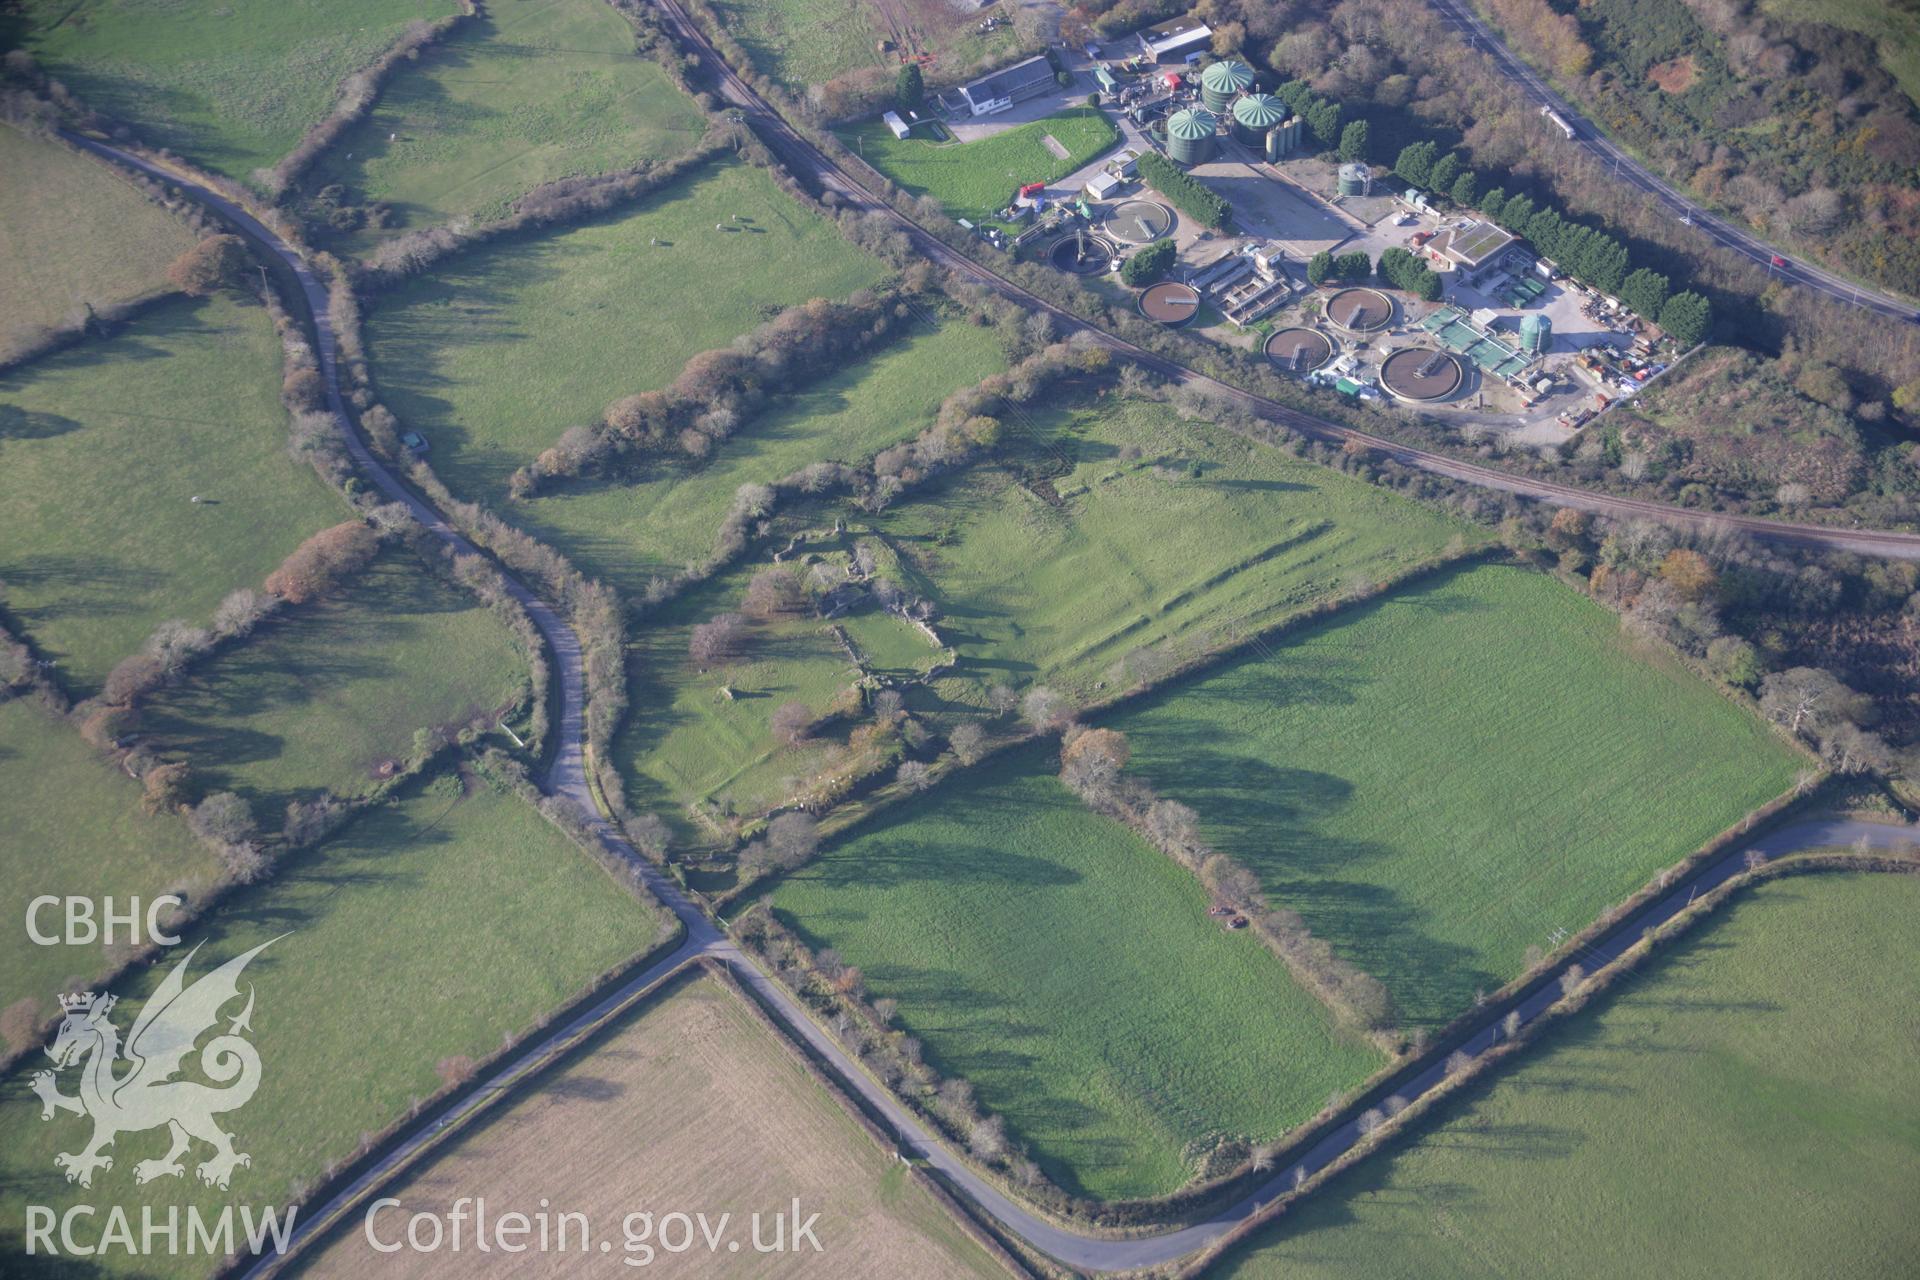 RCAHMW colour oblique aerial photograph of Haroldston House Garden Earthworks, Haverfordwest, in winter with low light looking west. Taken on 19 November 2005 by Toby Driver